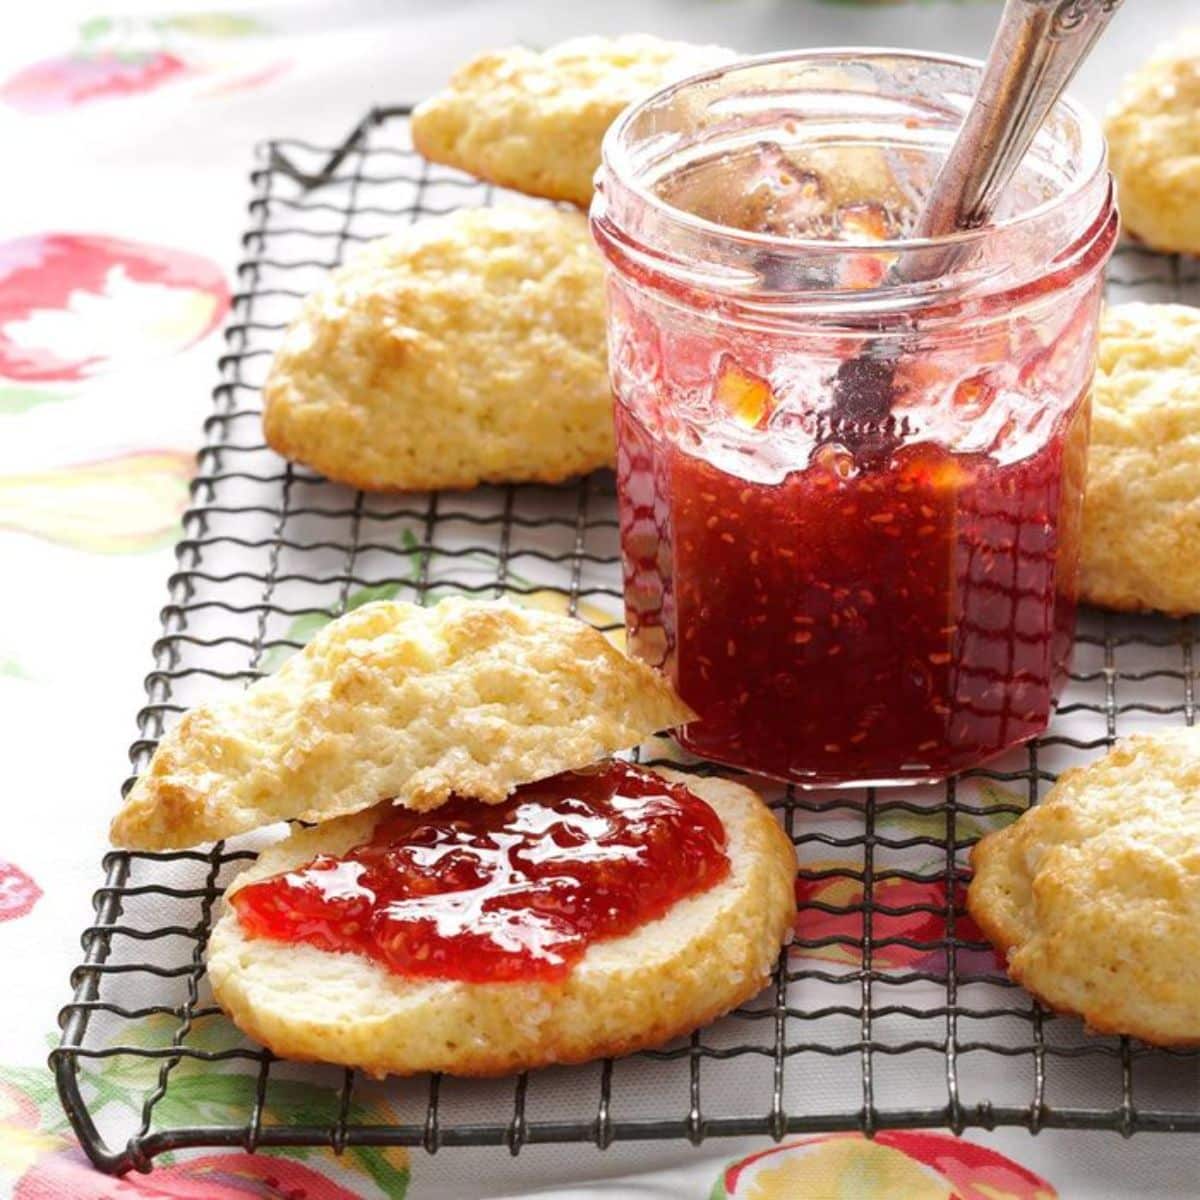 Raspberry peach jam in a glass jar and pieces of bread on a resting grid.